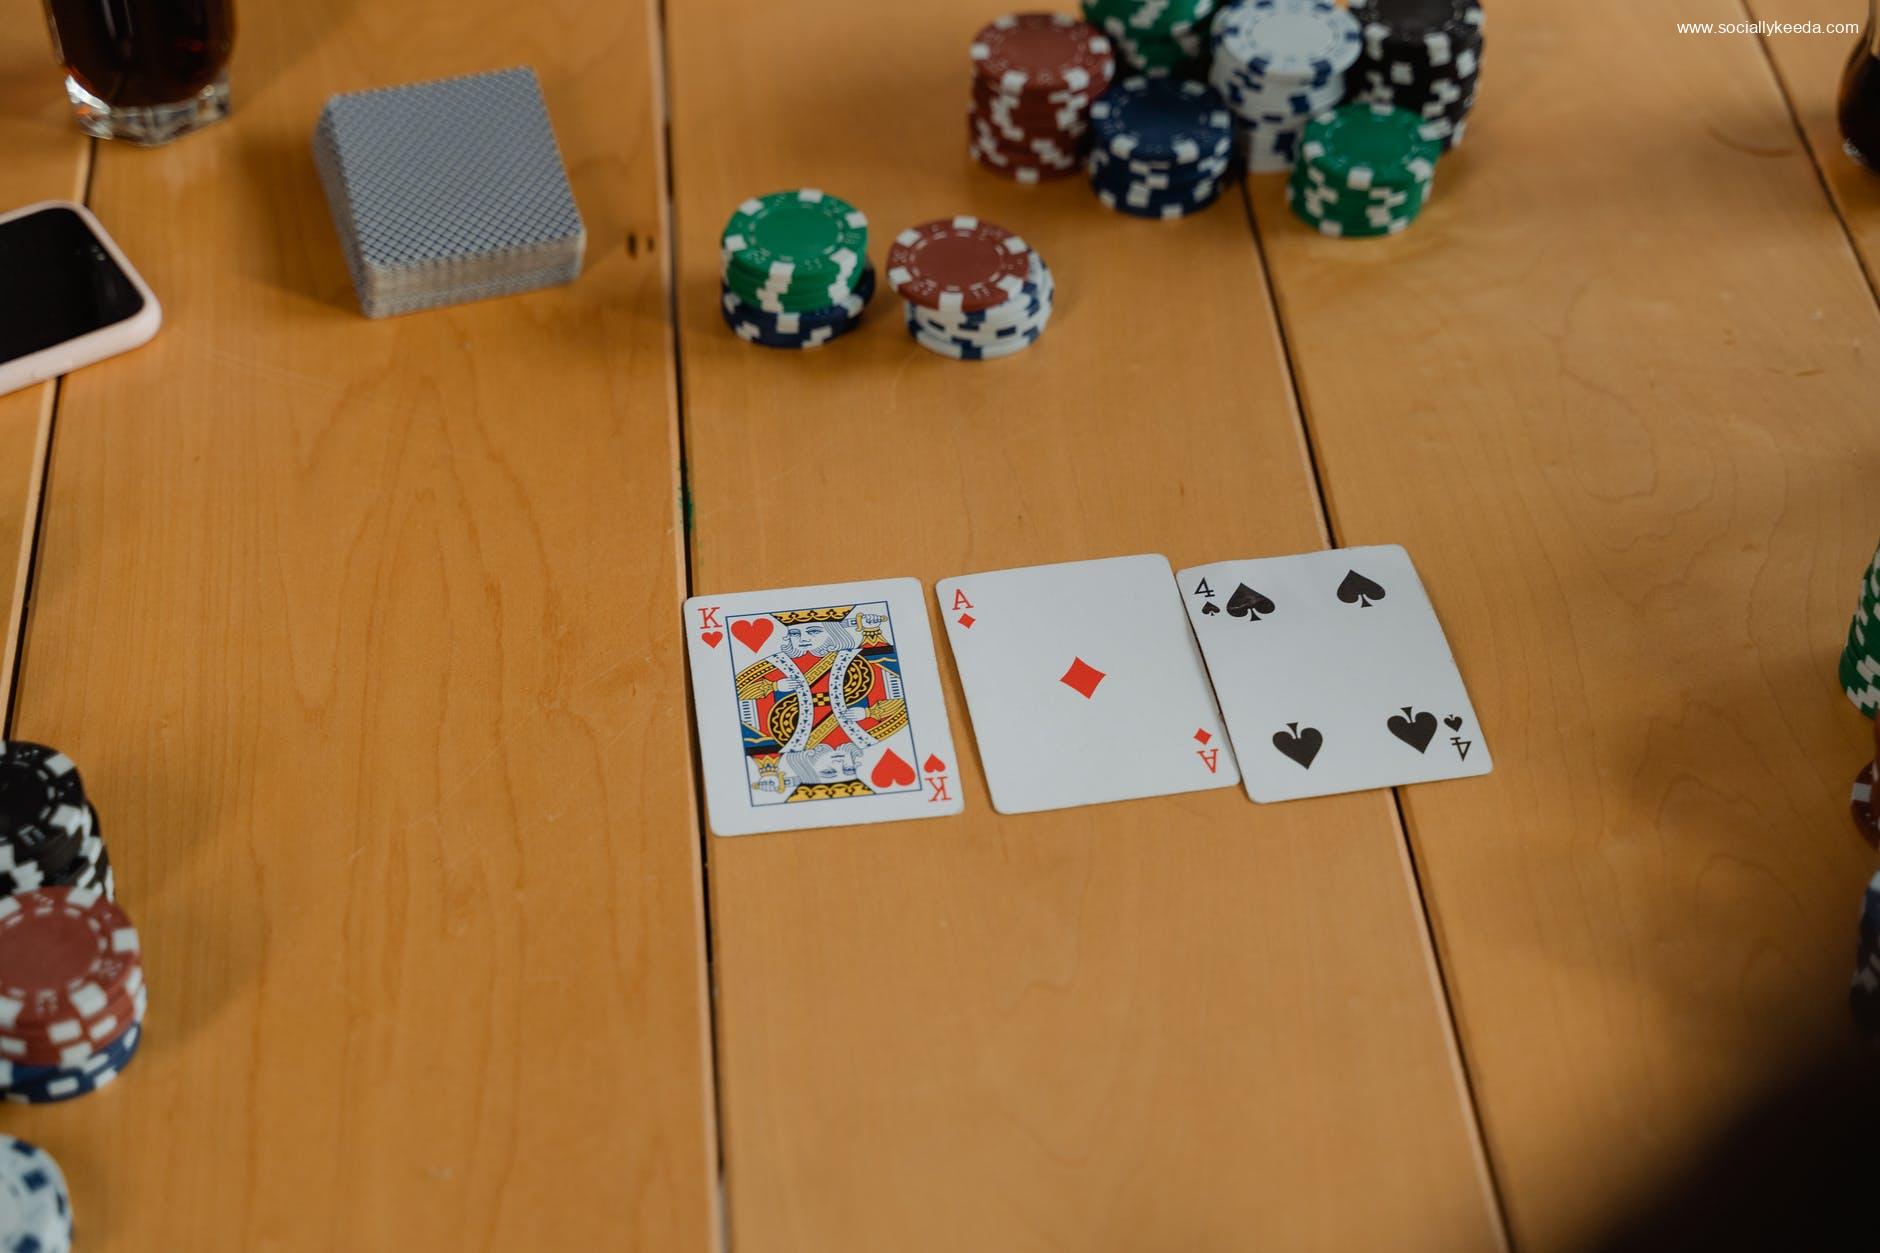 playing cards on brown wooden table